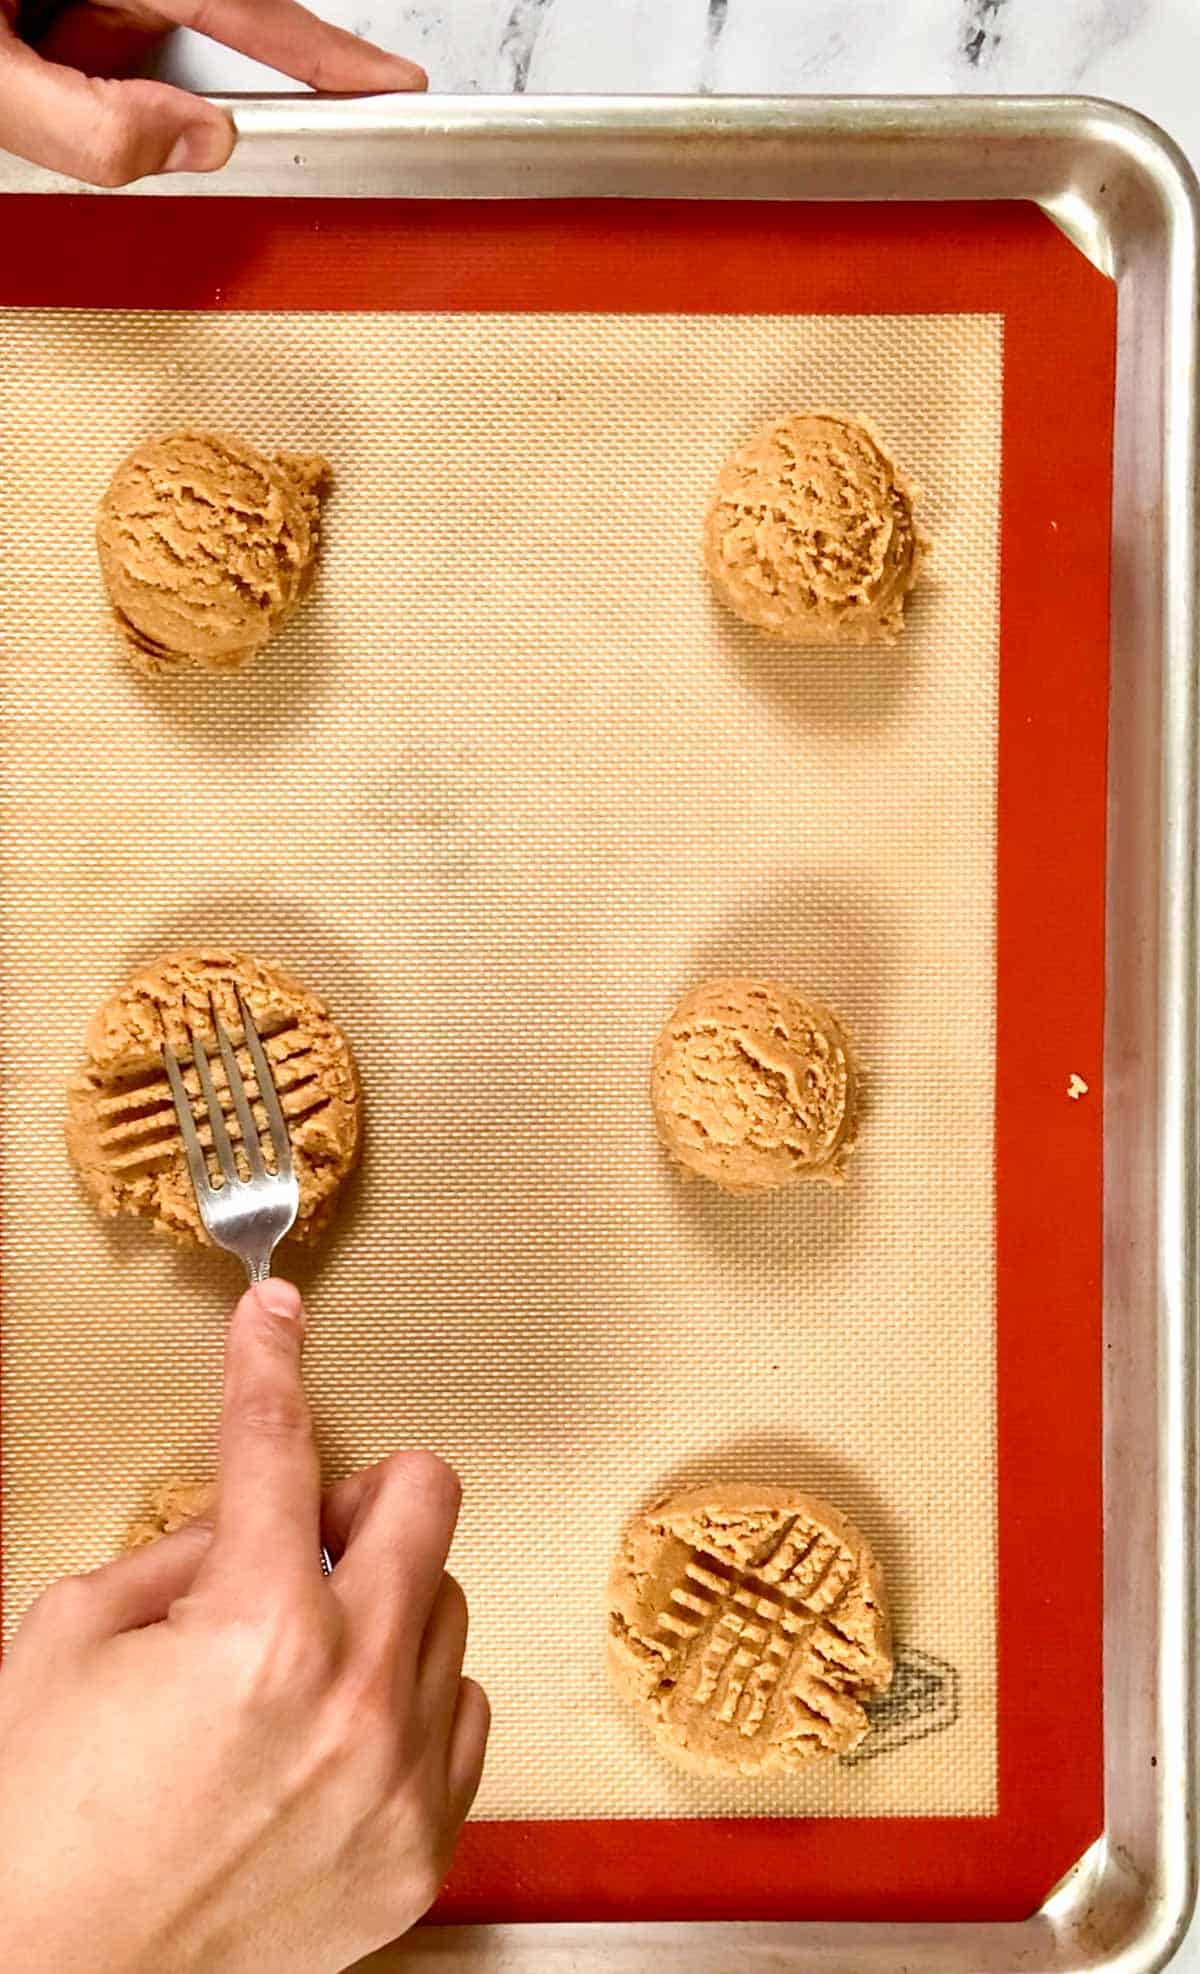 Pressing and shapring the criss cross design on the almond flour cookies dough balls.